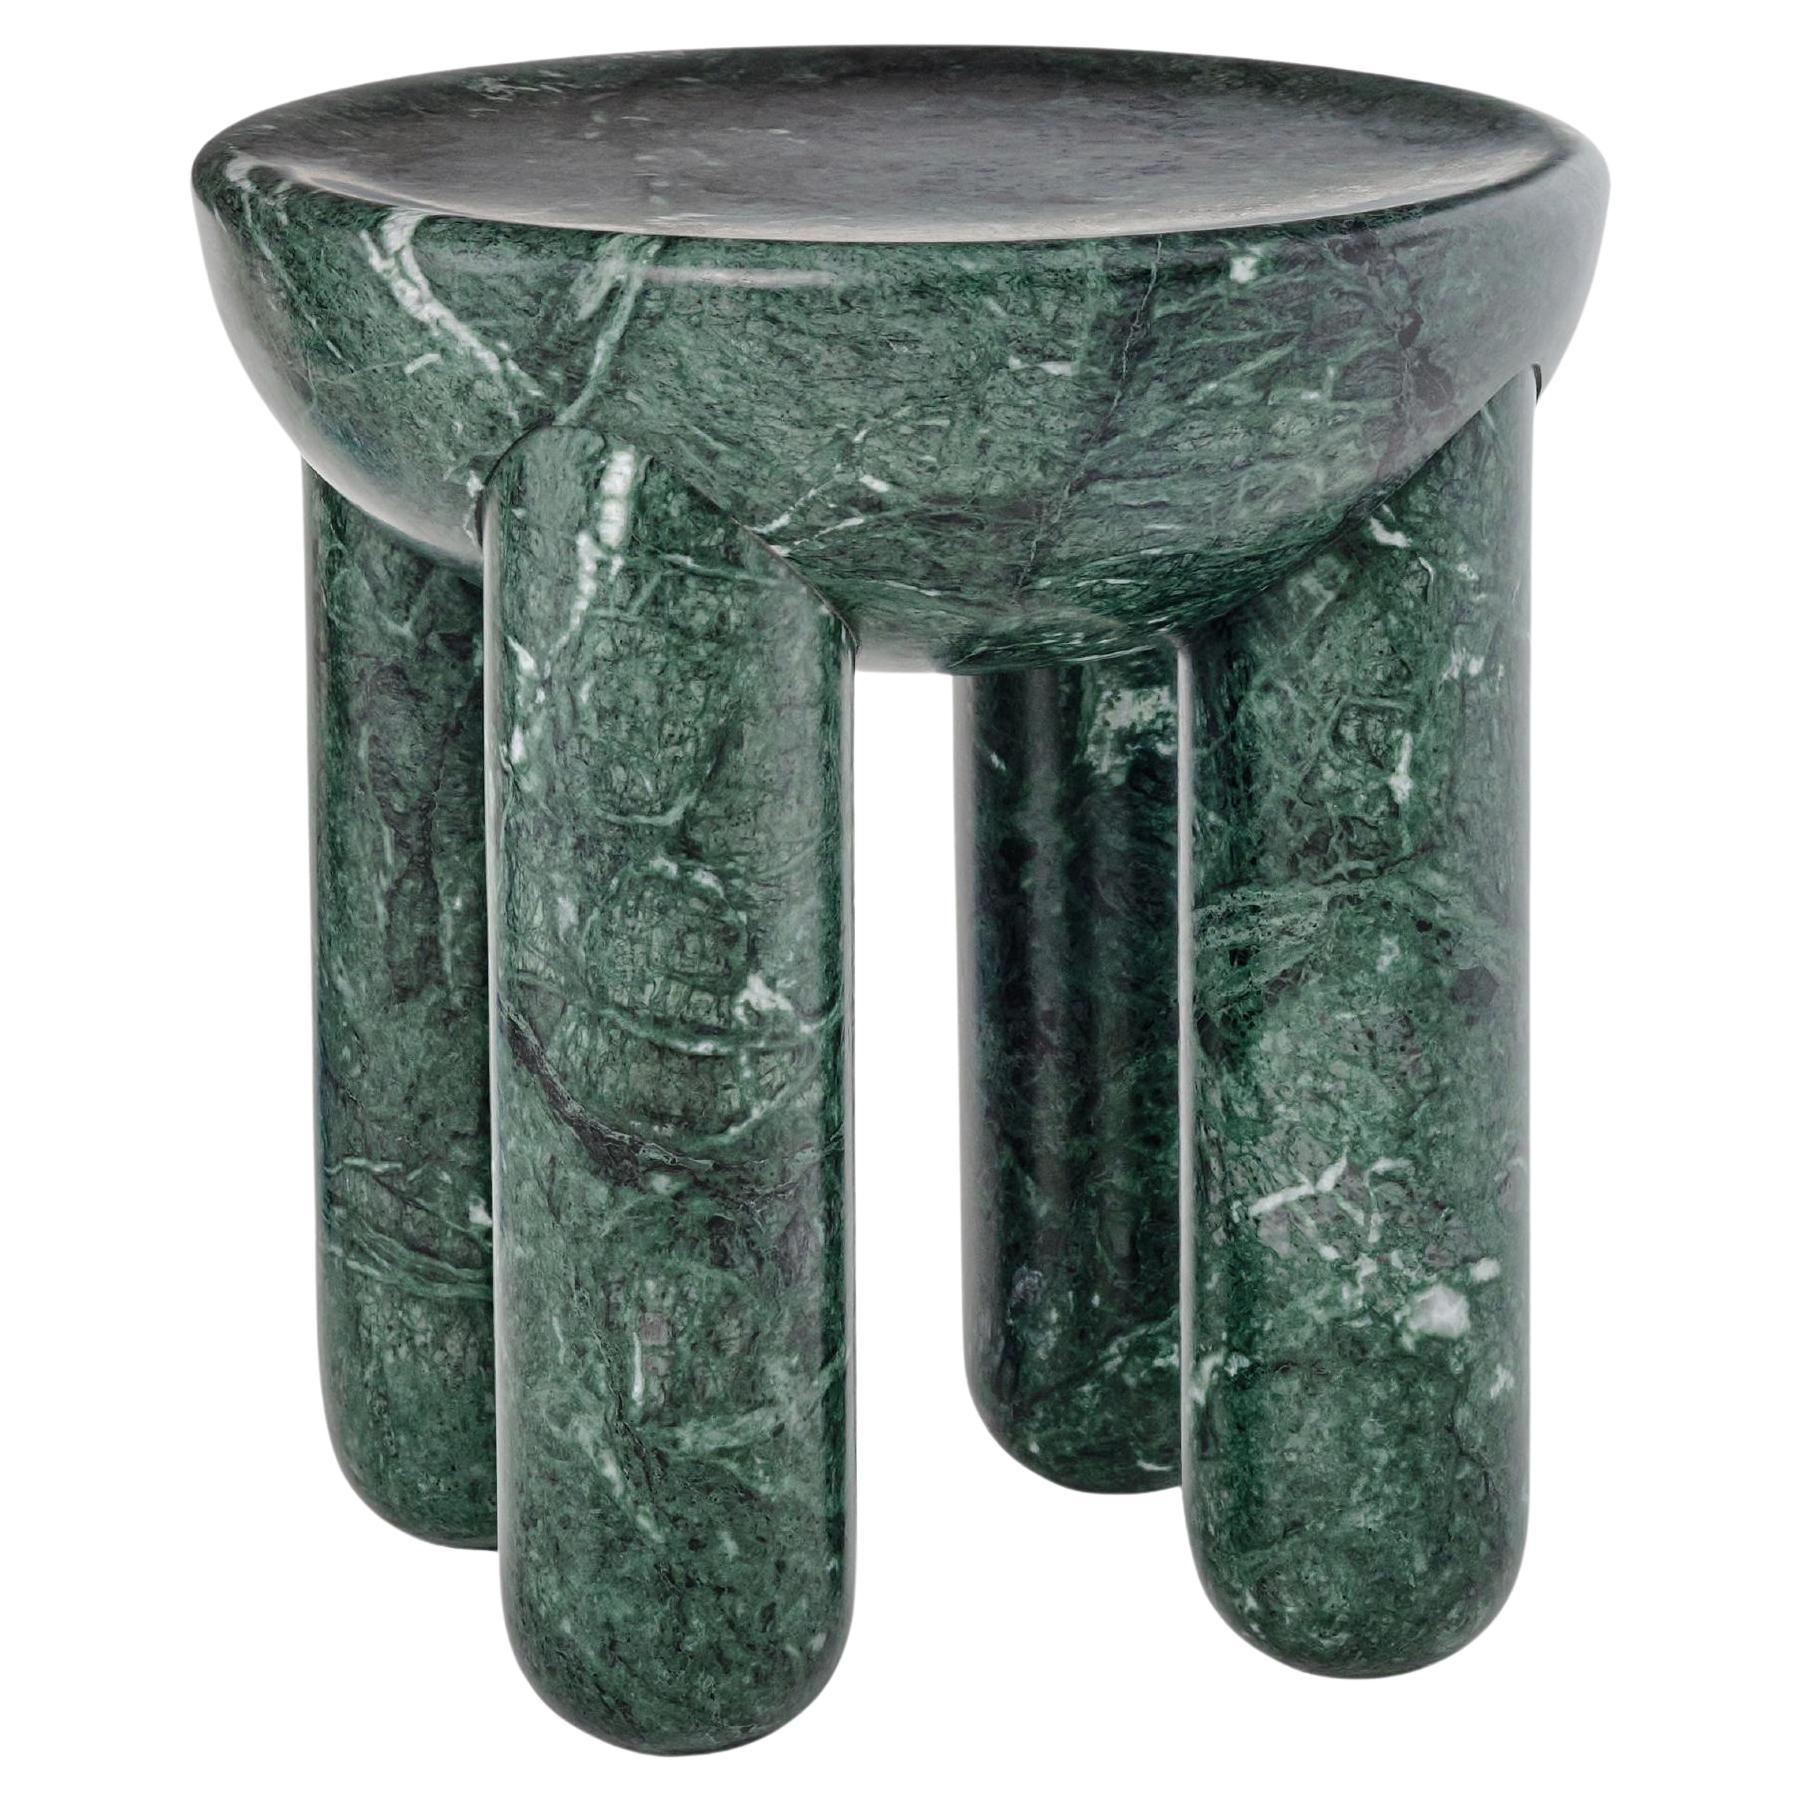 Contemporary Coffee or Side Table 'Freyja 3' by Noom, Green Marble